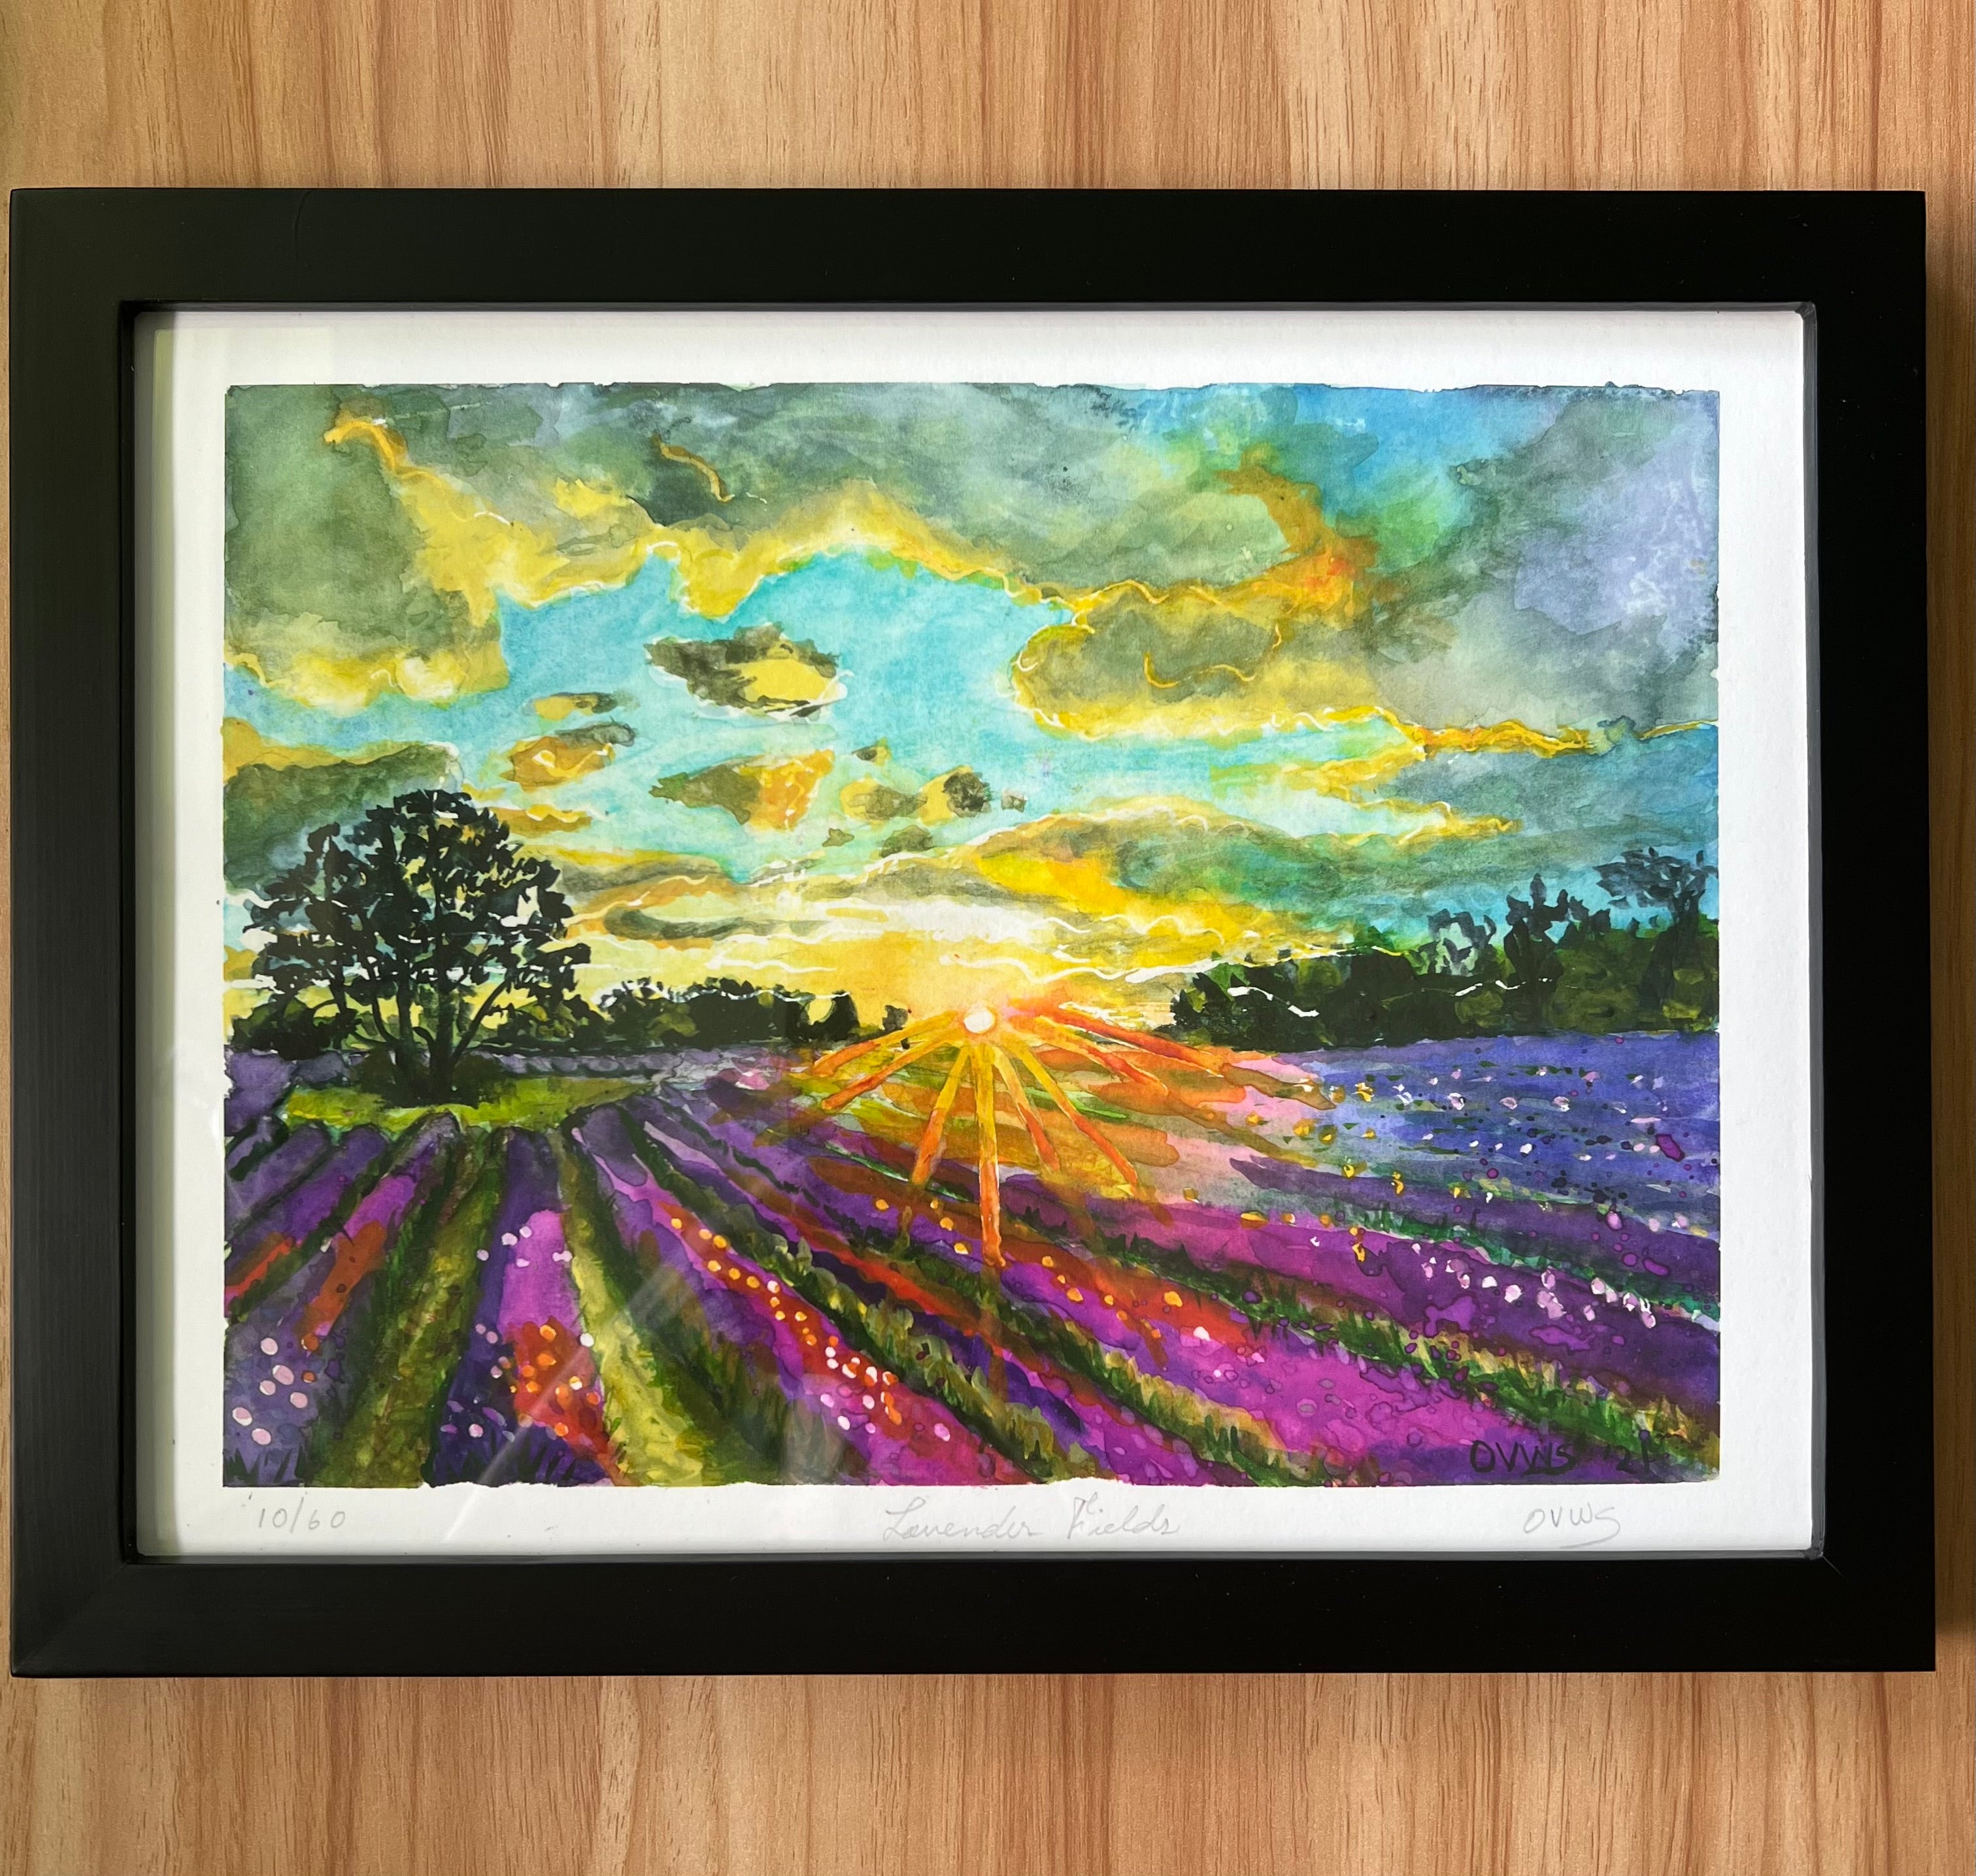 lavender field painting